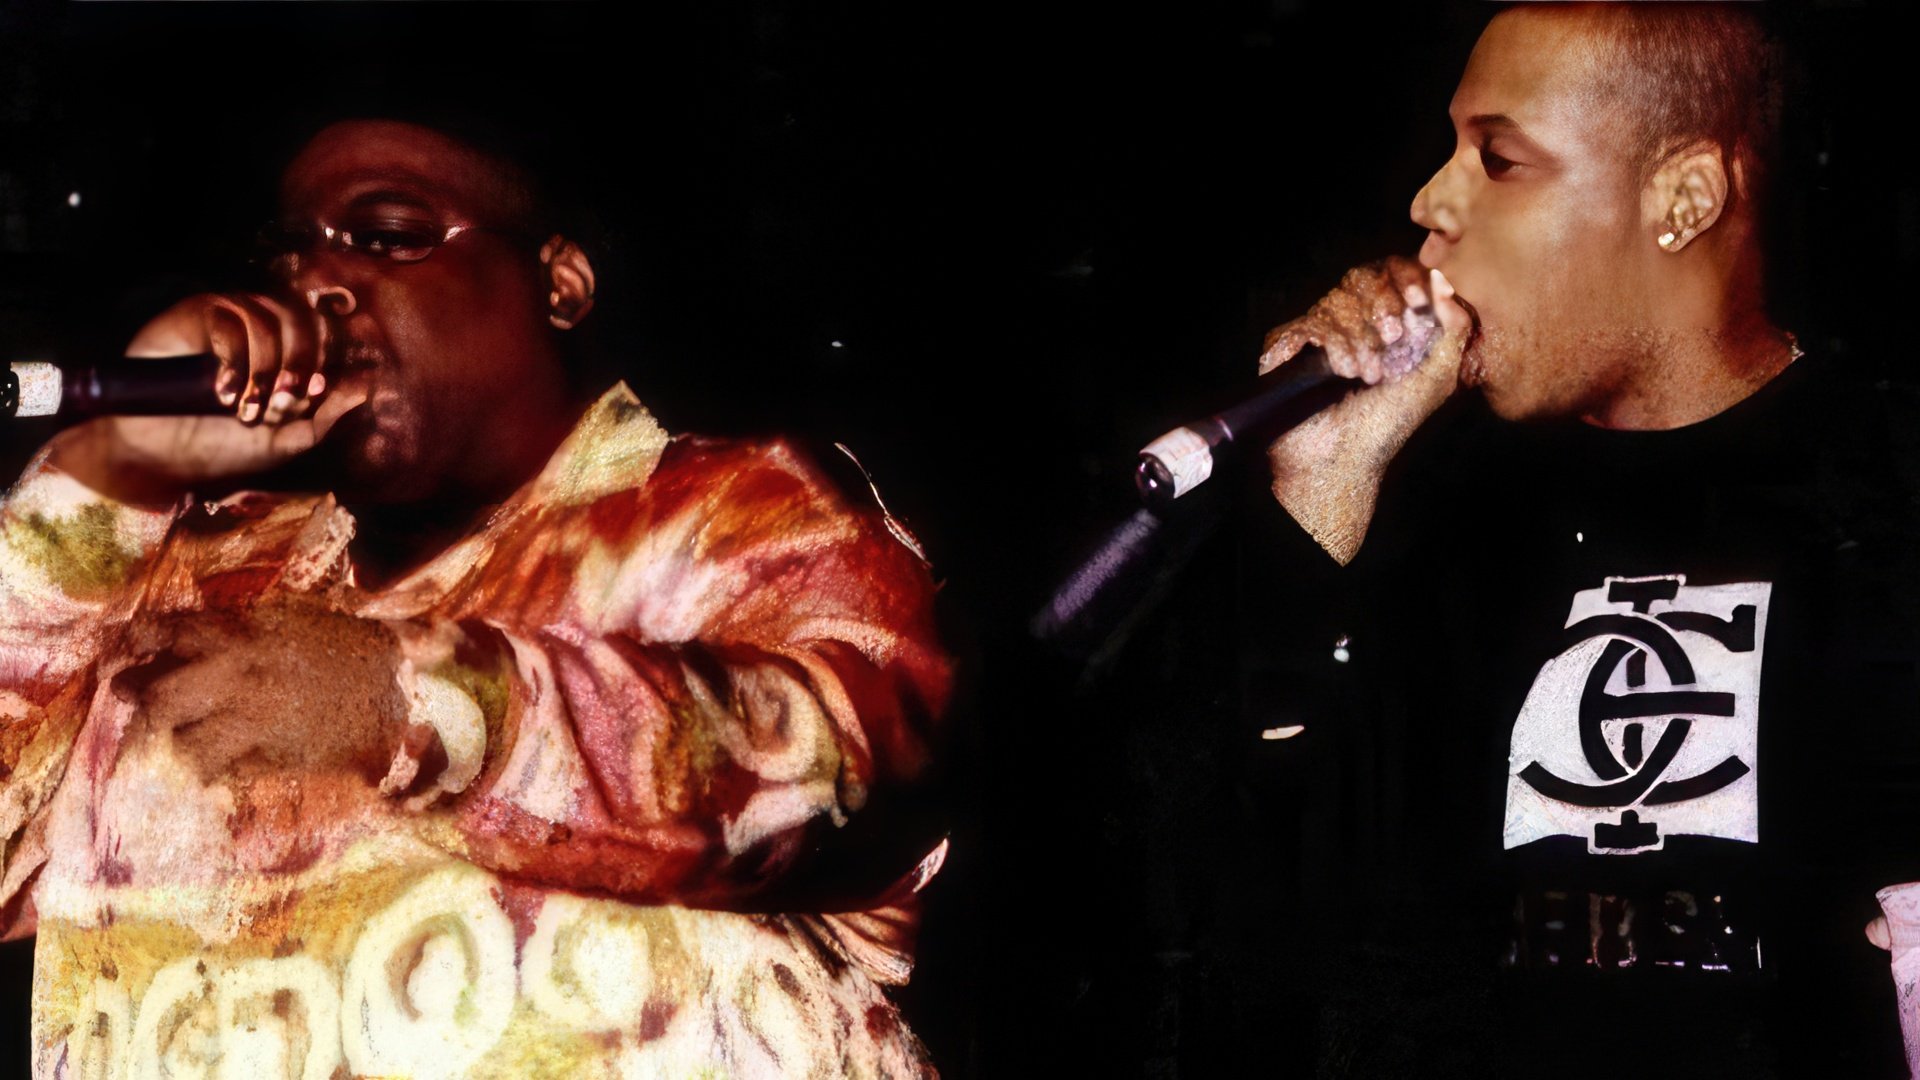 The Notorious B.I.G and Jay-Z